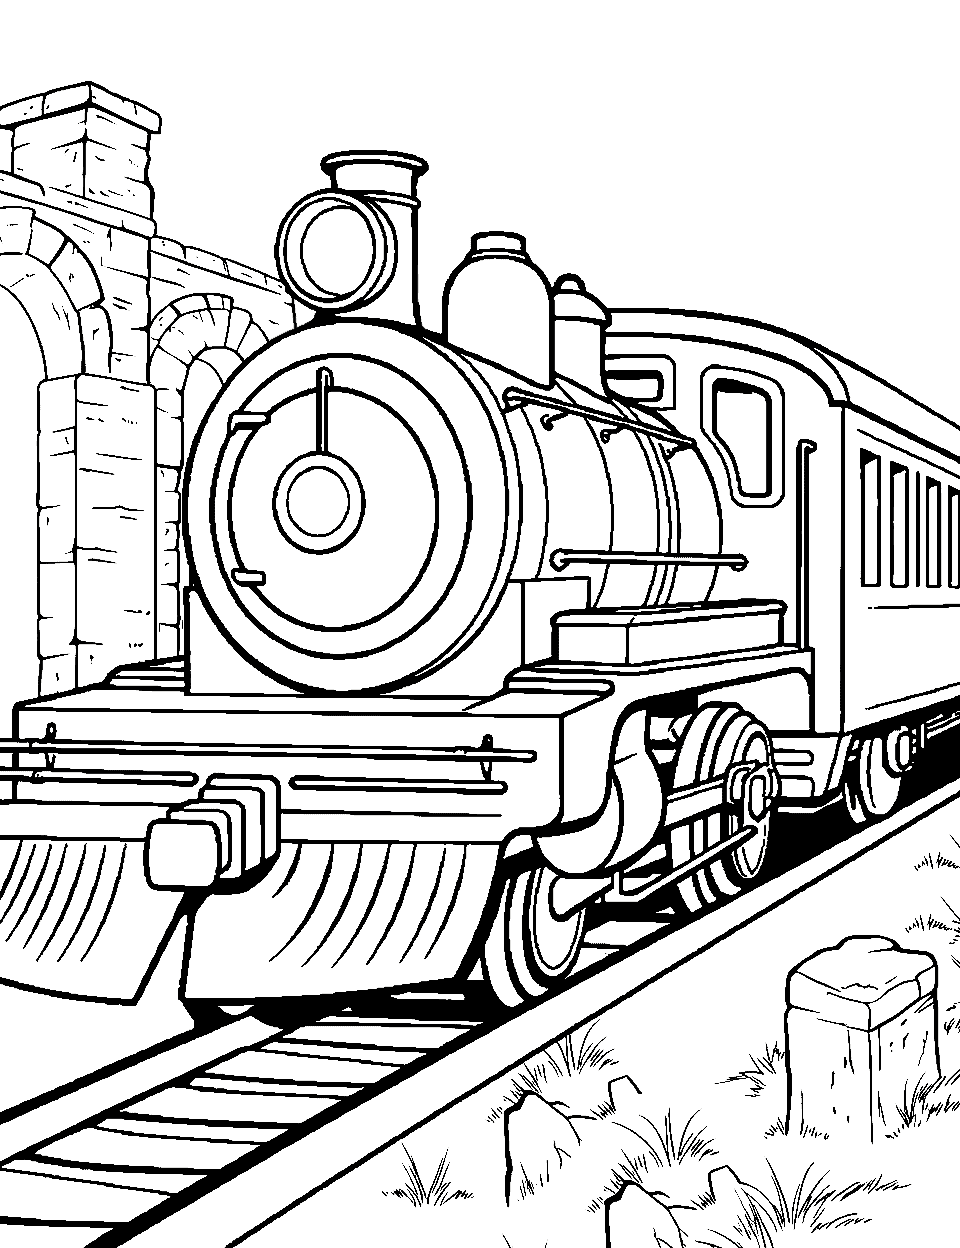 Train Through Ancient Ruins Coloring Page - A train passing by historical, ancient ruins.